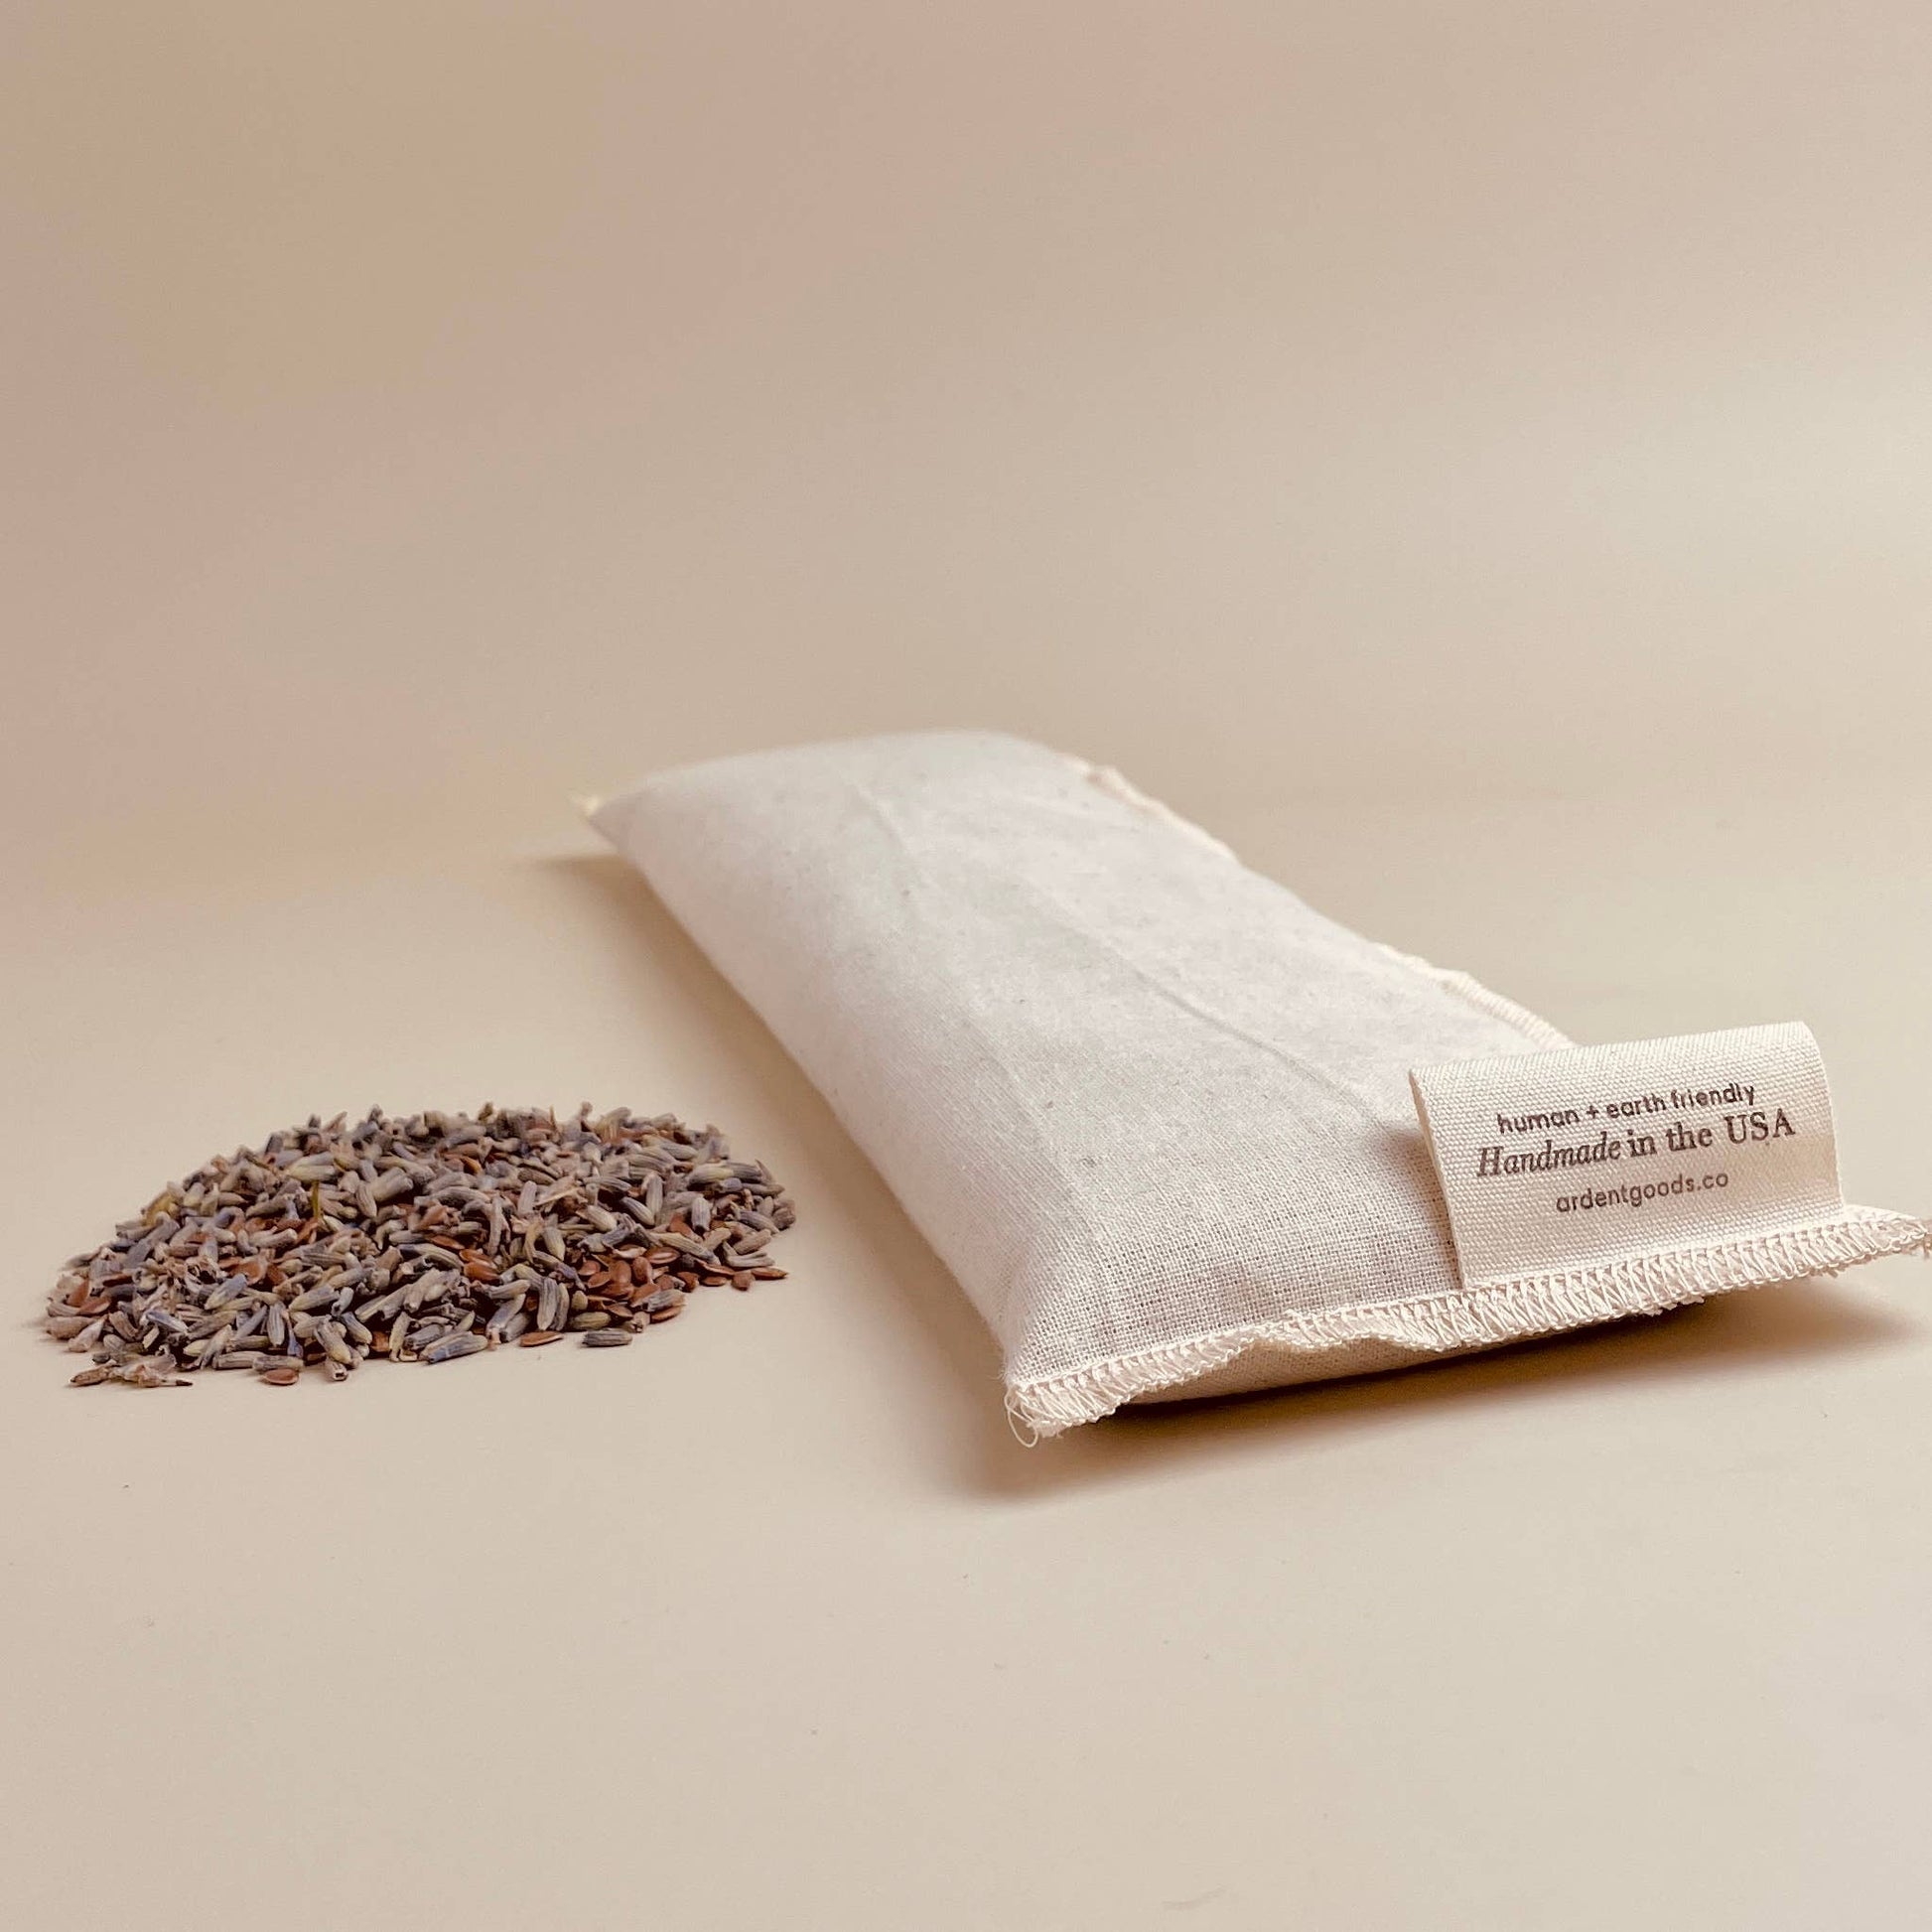 Relax puffy eyes and relieve stress using Ardent Goods handmade lavender eye pillow filled with locally sourced lavender buds and flaxseeds. Natural ingredients help with relaxation without artificial fragrances or synthetic ingredients.